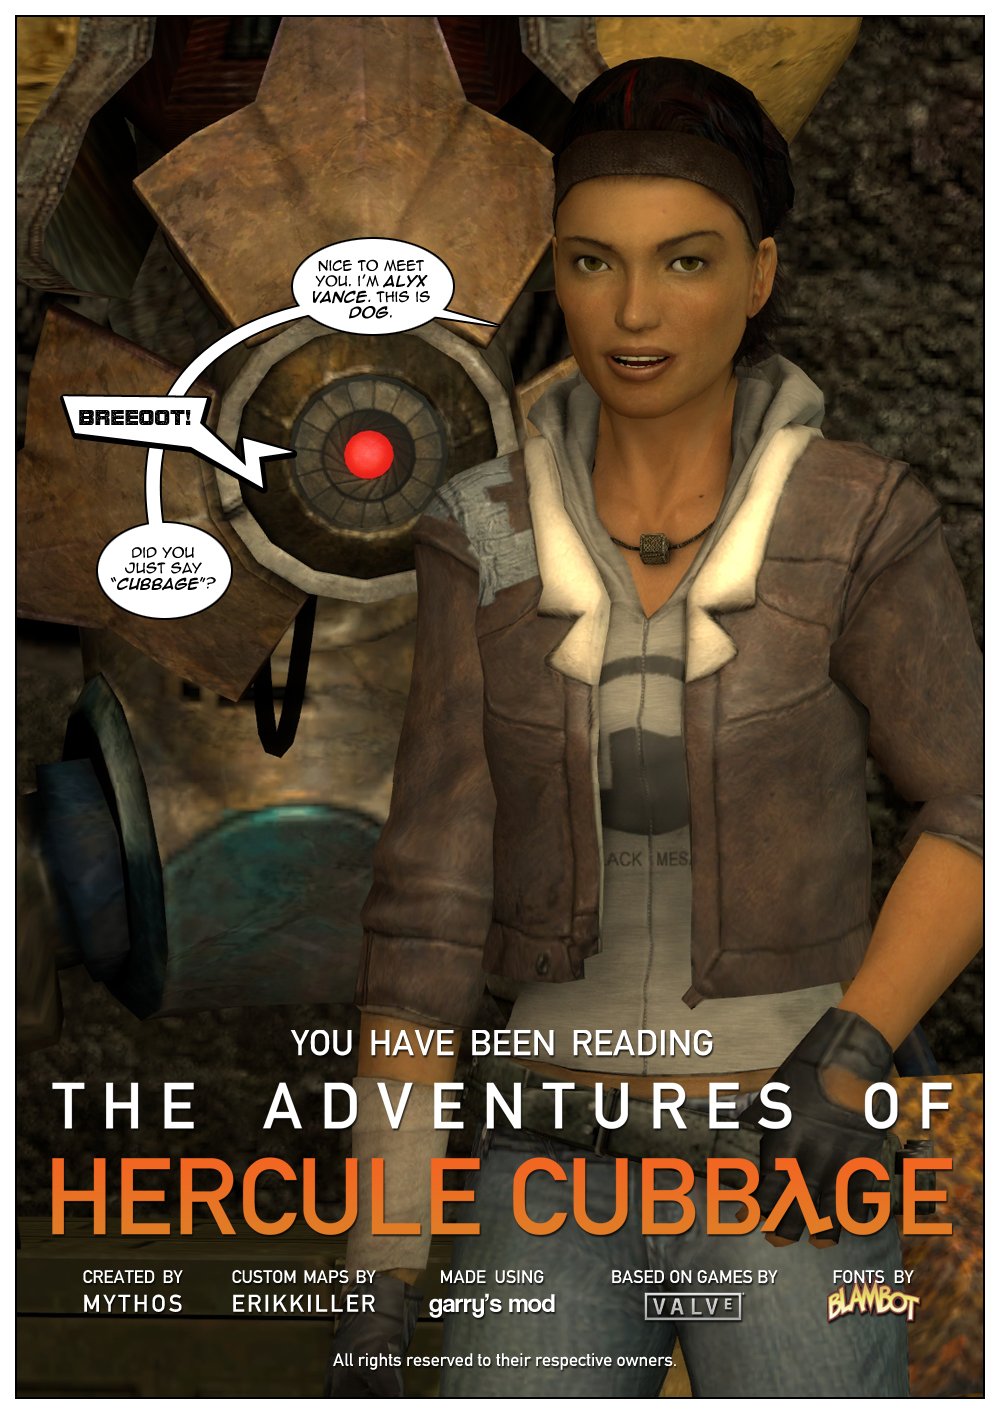 The person talking to Hercule and Lucy is a young Black Asian woman in her twenties, wearing an old patched up coat and an old hoodie with the words Black Mesa in it. Behind her is a robotic giant with an old Combine scanner for a head. She introduces herself. Nice to meet you, I'm Alyx Vance. This is Dog. Did you just say "Cubbage"? End of Chapter Two.